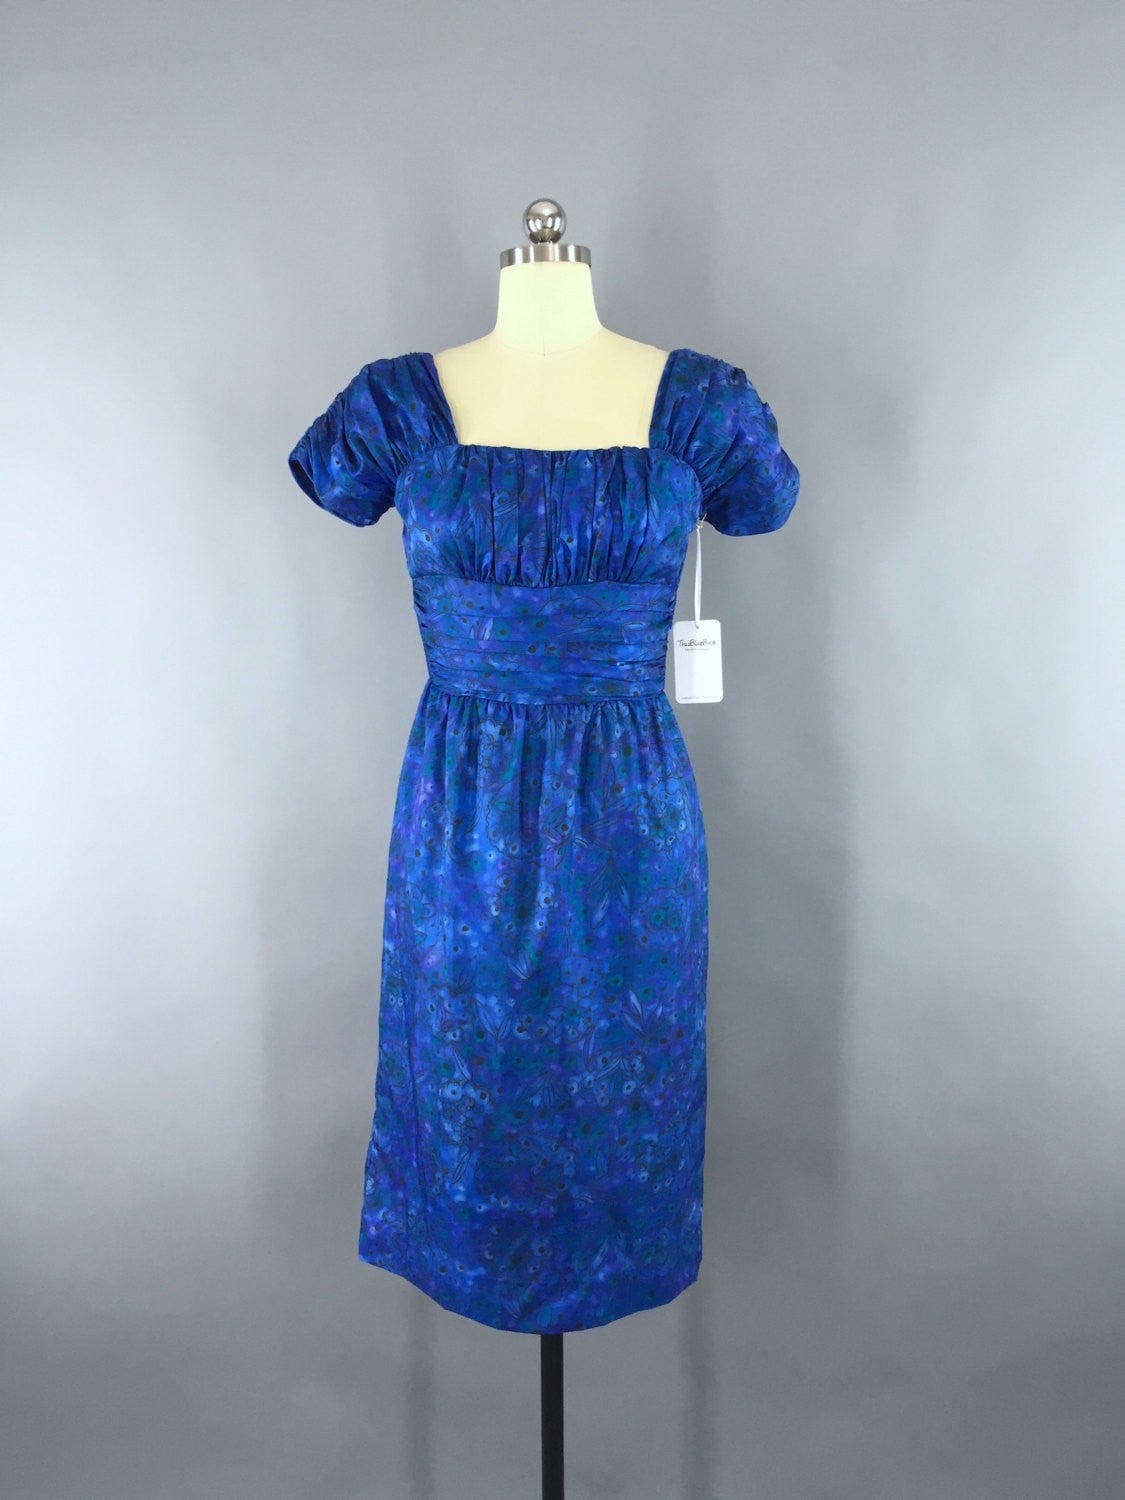 1950s Vintage Dress with Blue Floral Print - ThisBlueBird